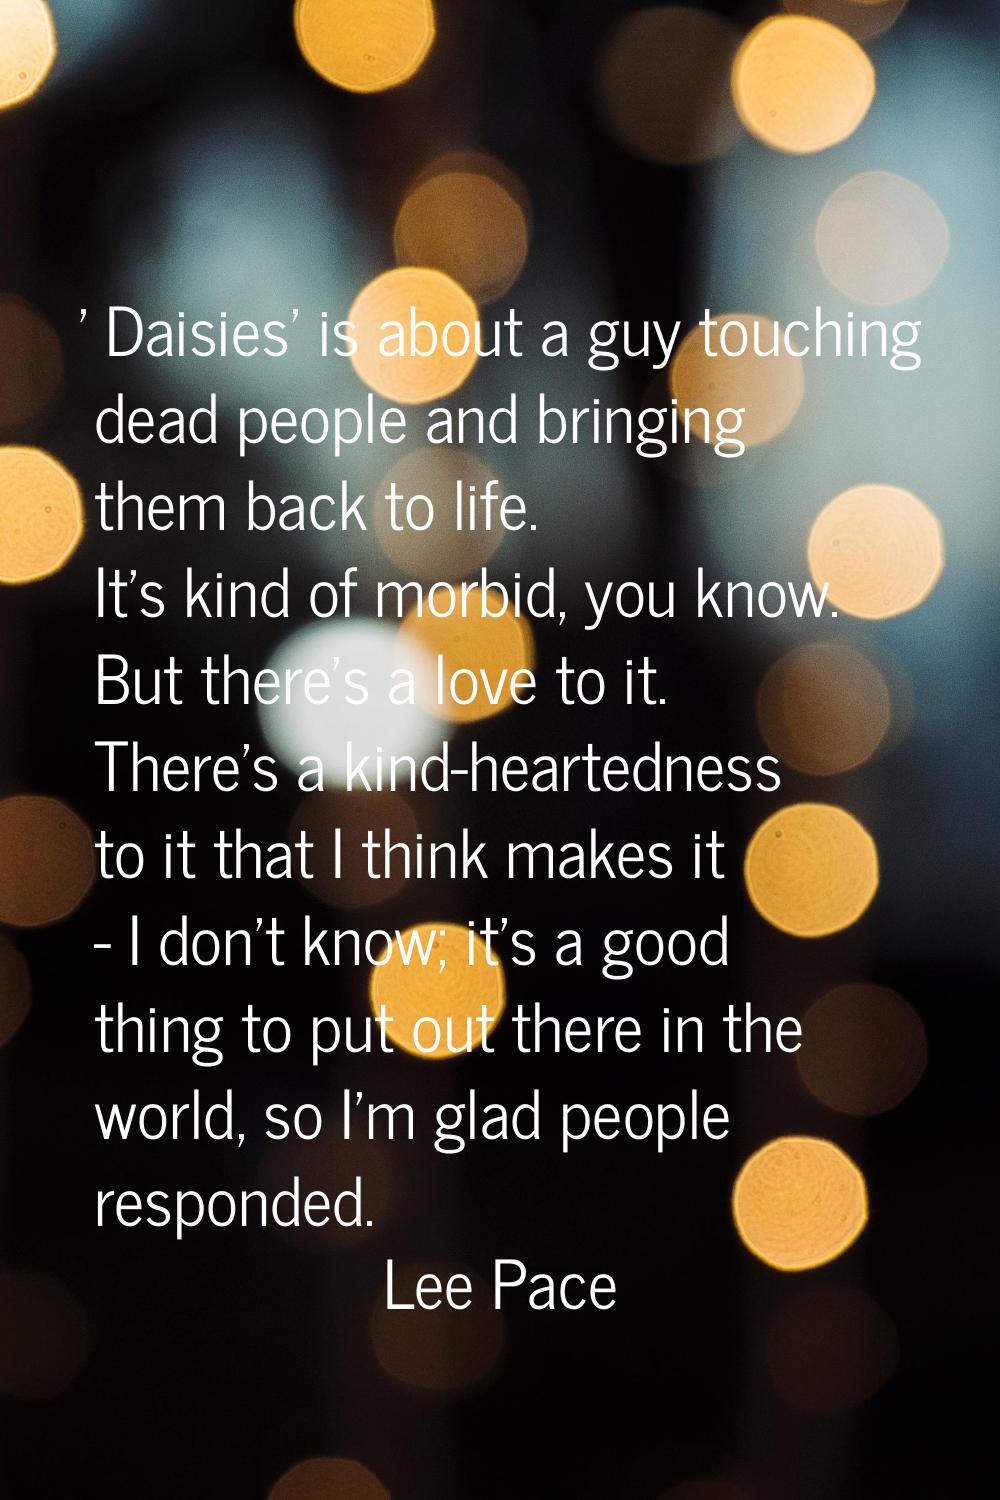 ' Daisies' is about a guy touching dead people and bringing them back to life. It's kind of morbid,